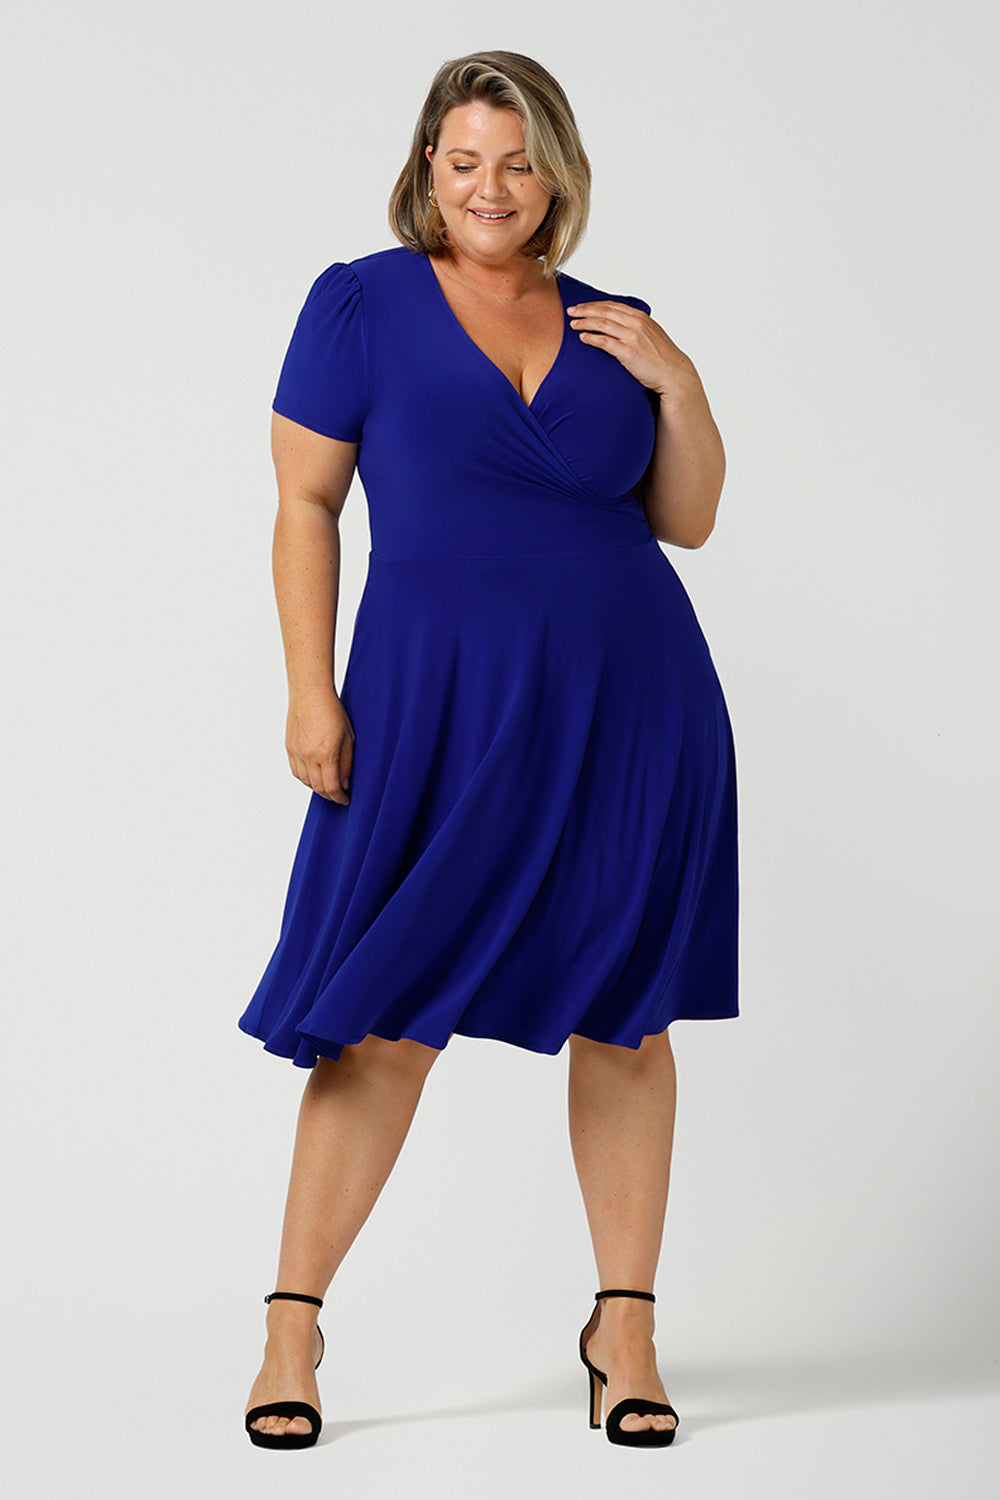 A size 18 woman wears a plus size jersey dress with short sleeves. In cobalt blue jersey, this dress is a good casual dress for weekend wear capsule wardrobes. Shop Australian-made wrap dresses for work online is sizes 8 to 24.